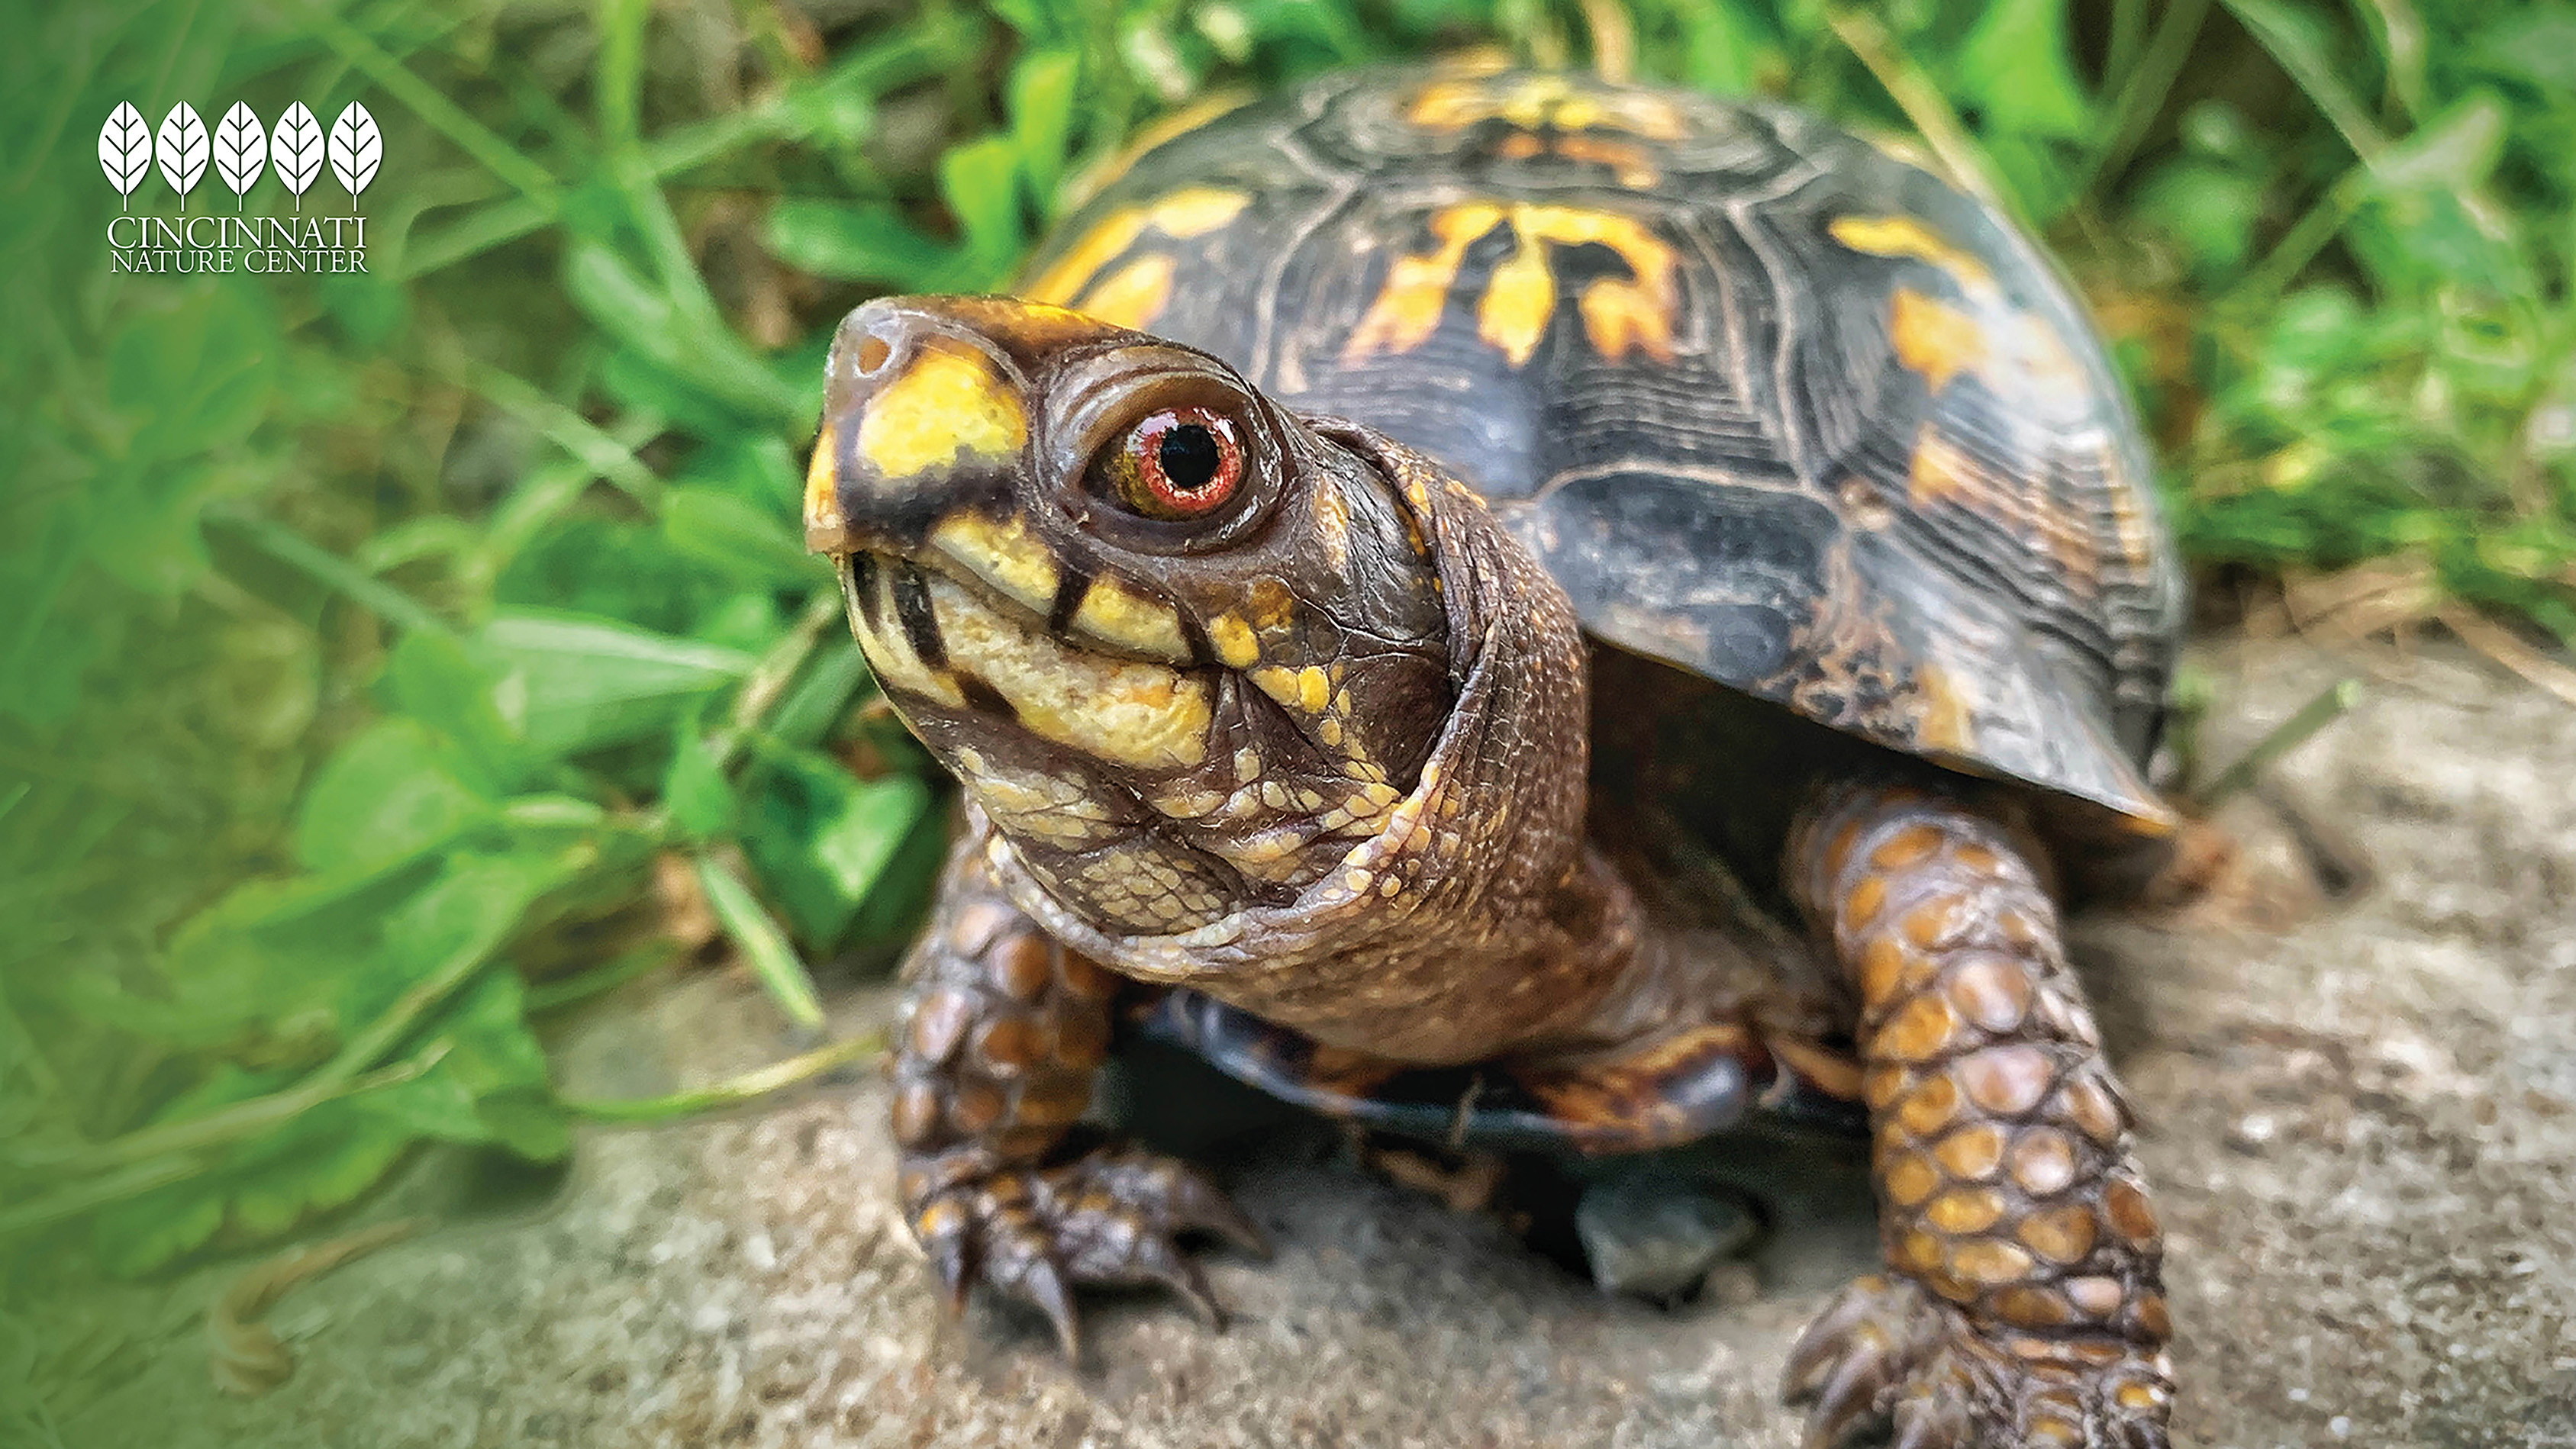 Close-up of a female Eastern box turtle